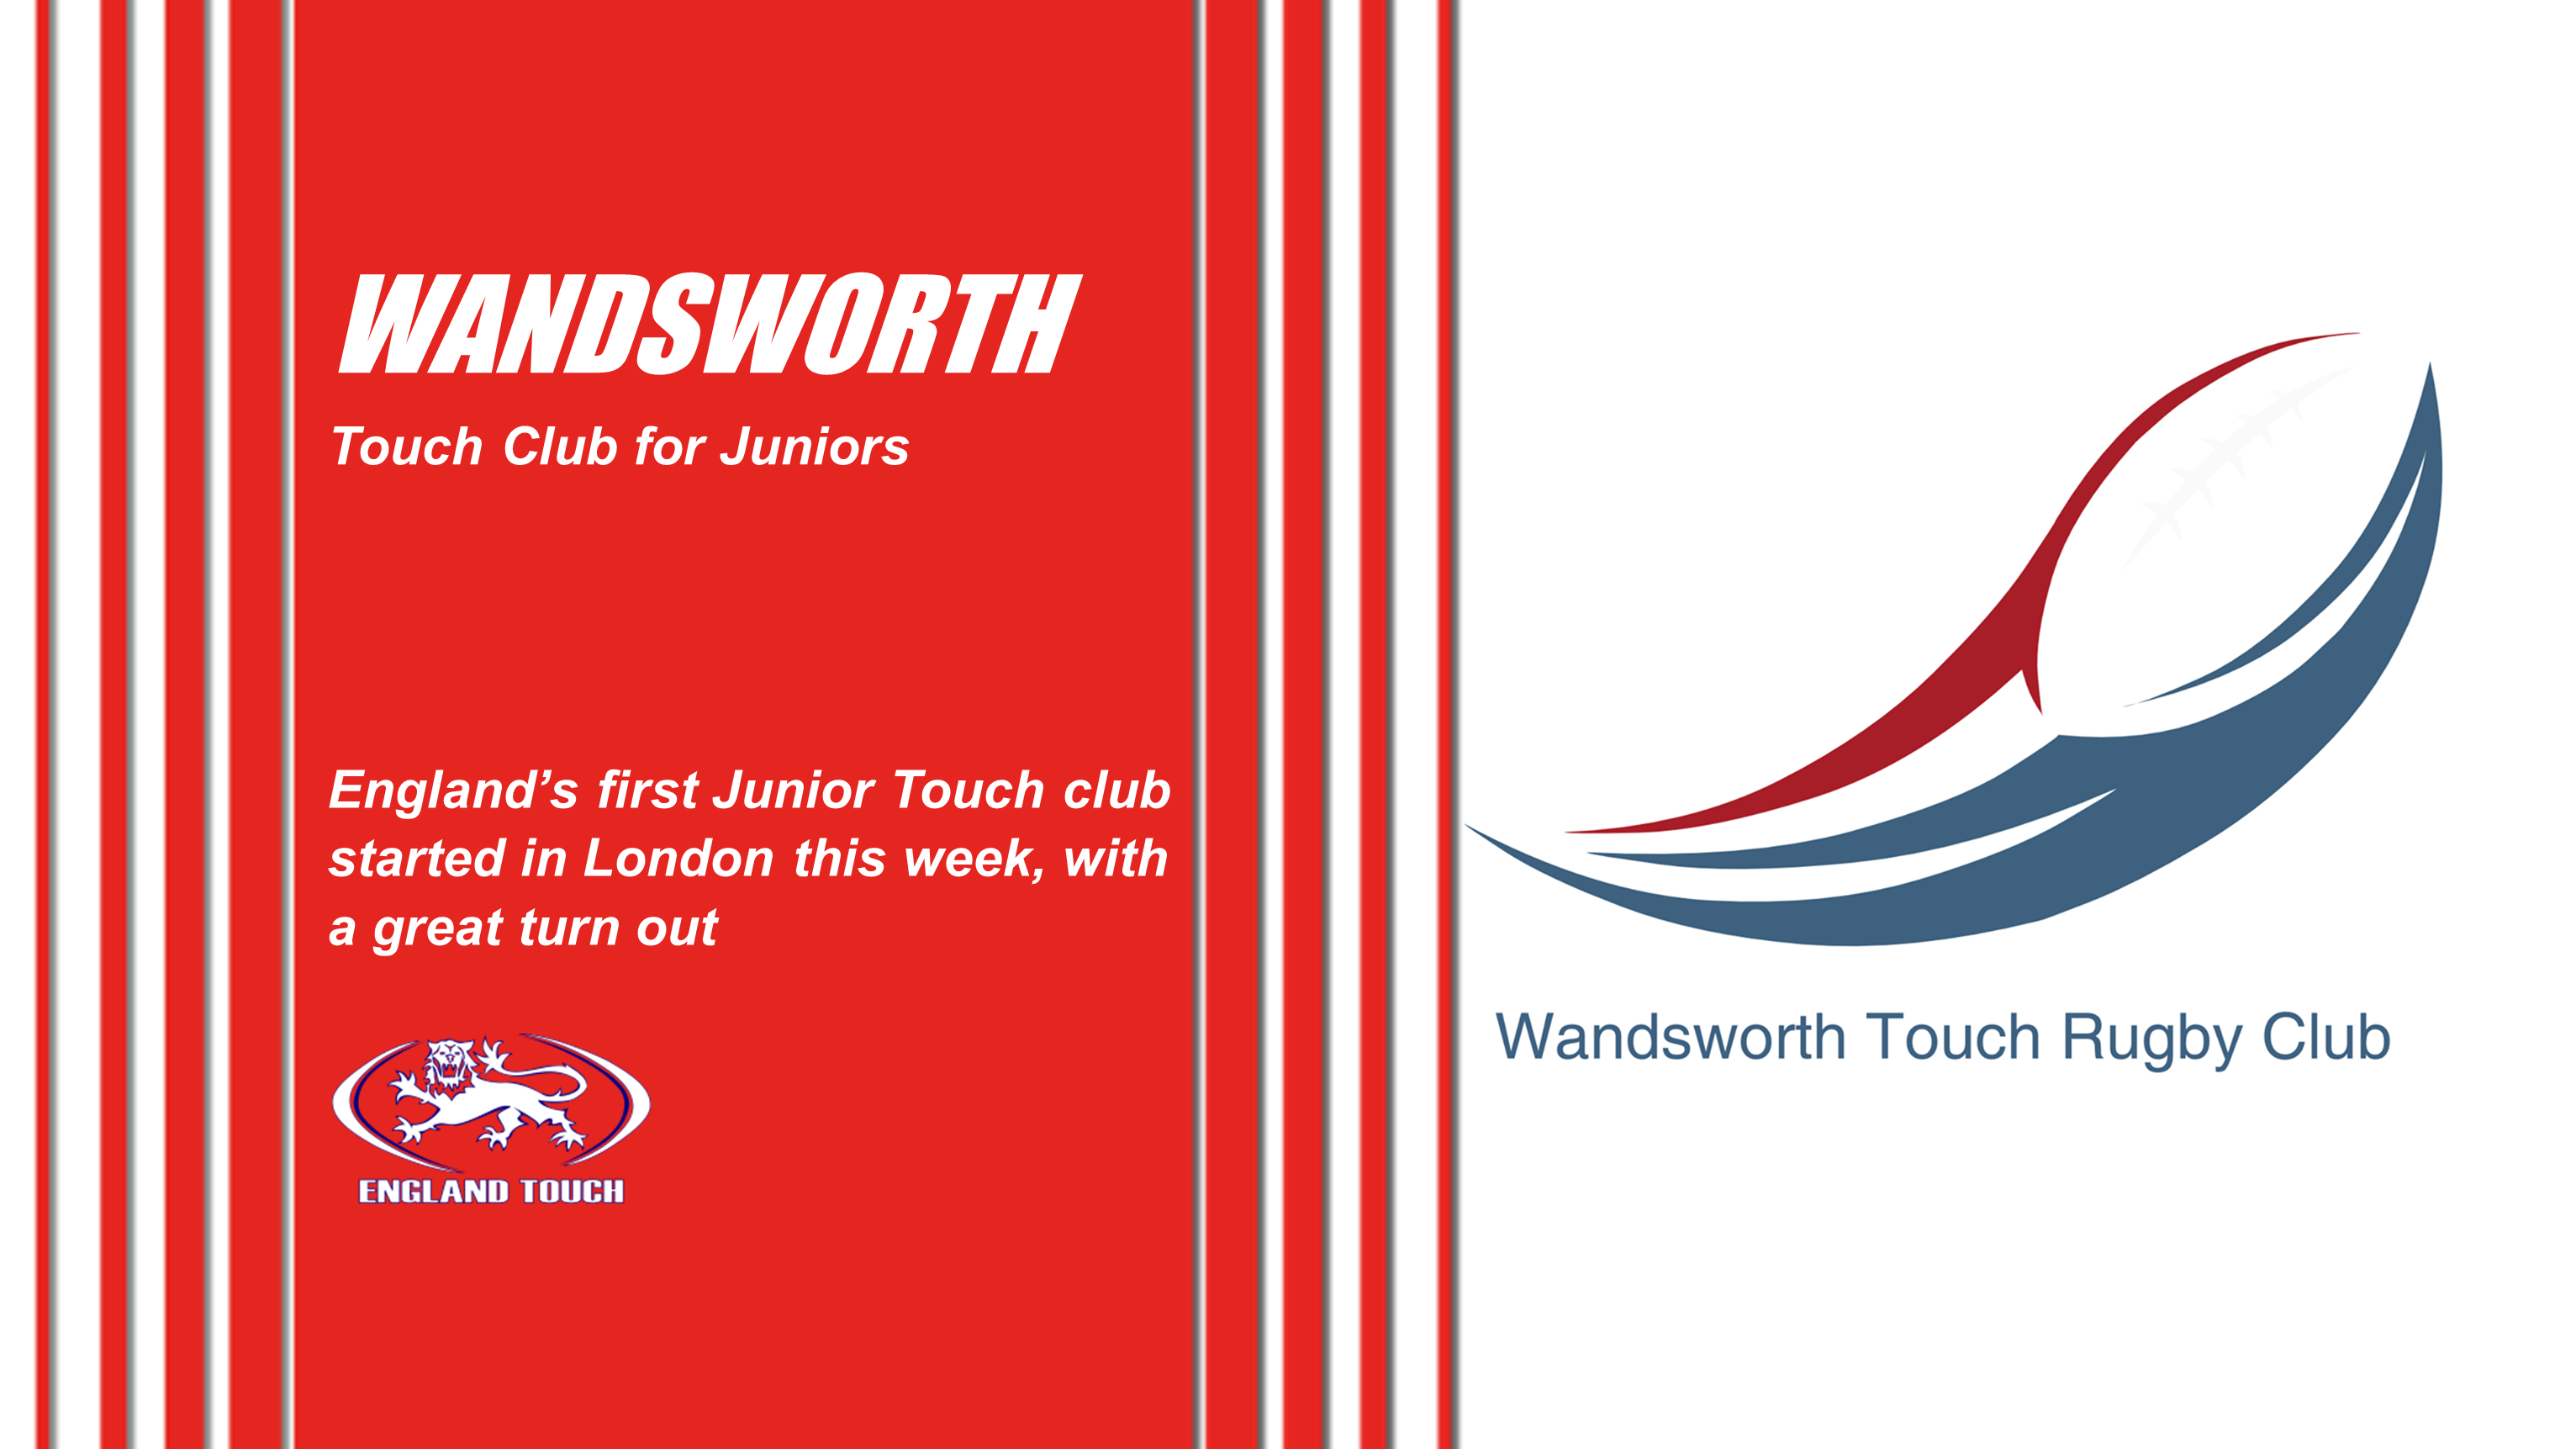 Hello to Wandsworth Touch!